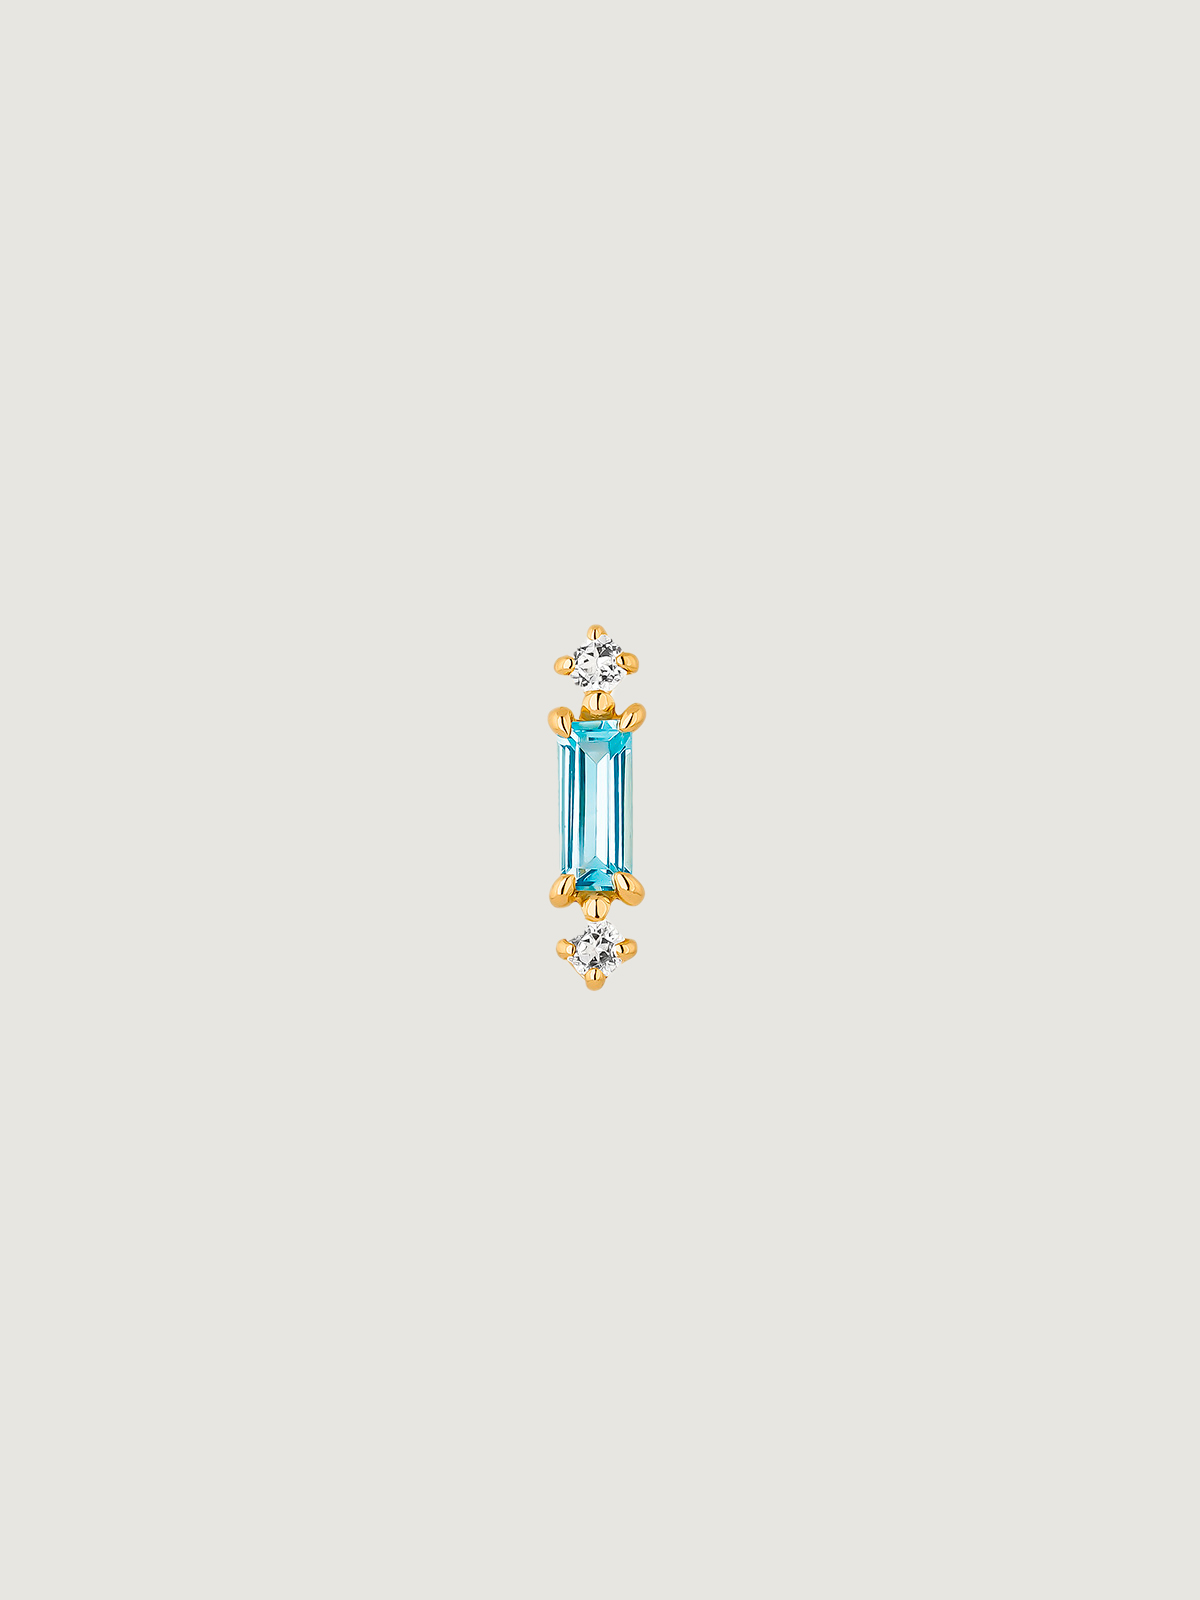 Individual 925 silver earring bathed in 18K yellow gold with sky blue and white topaz.